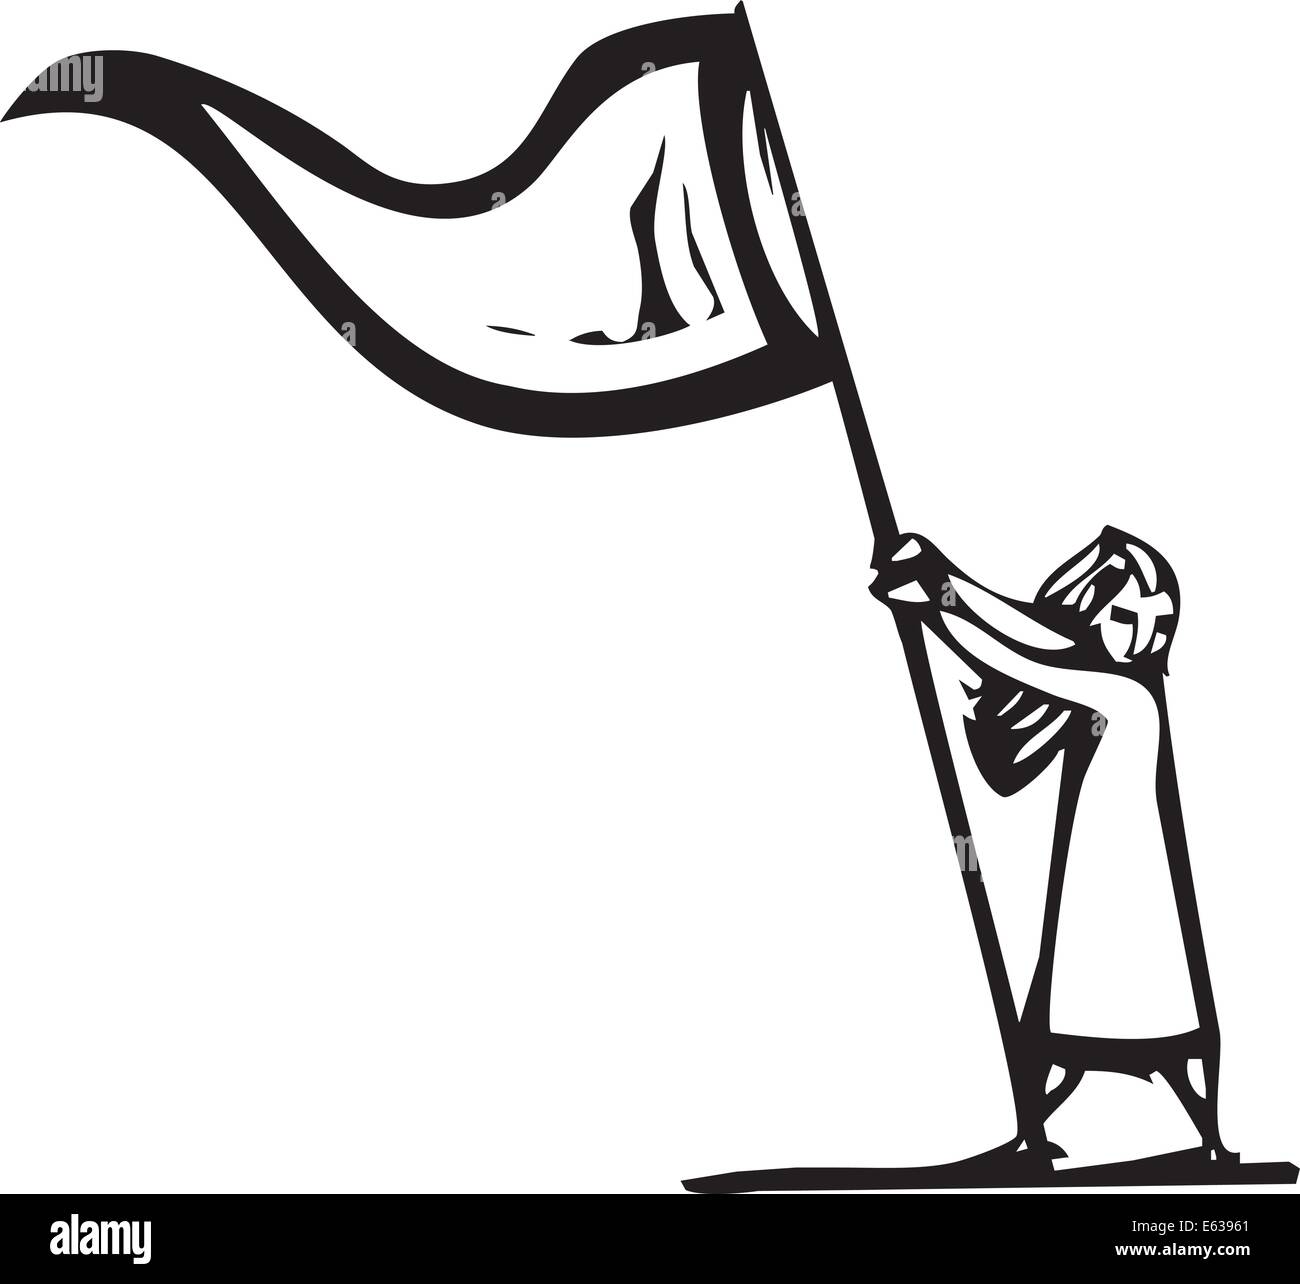 Woodcut expressionist style image of a girl waving a flag Stock Vector